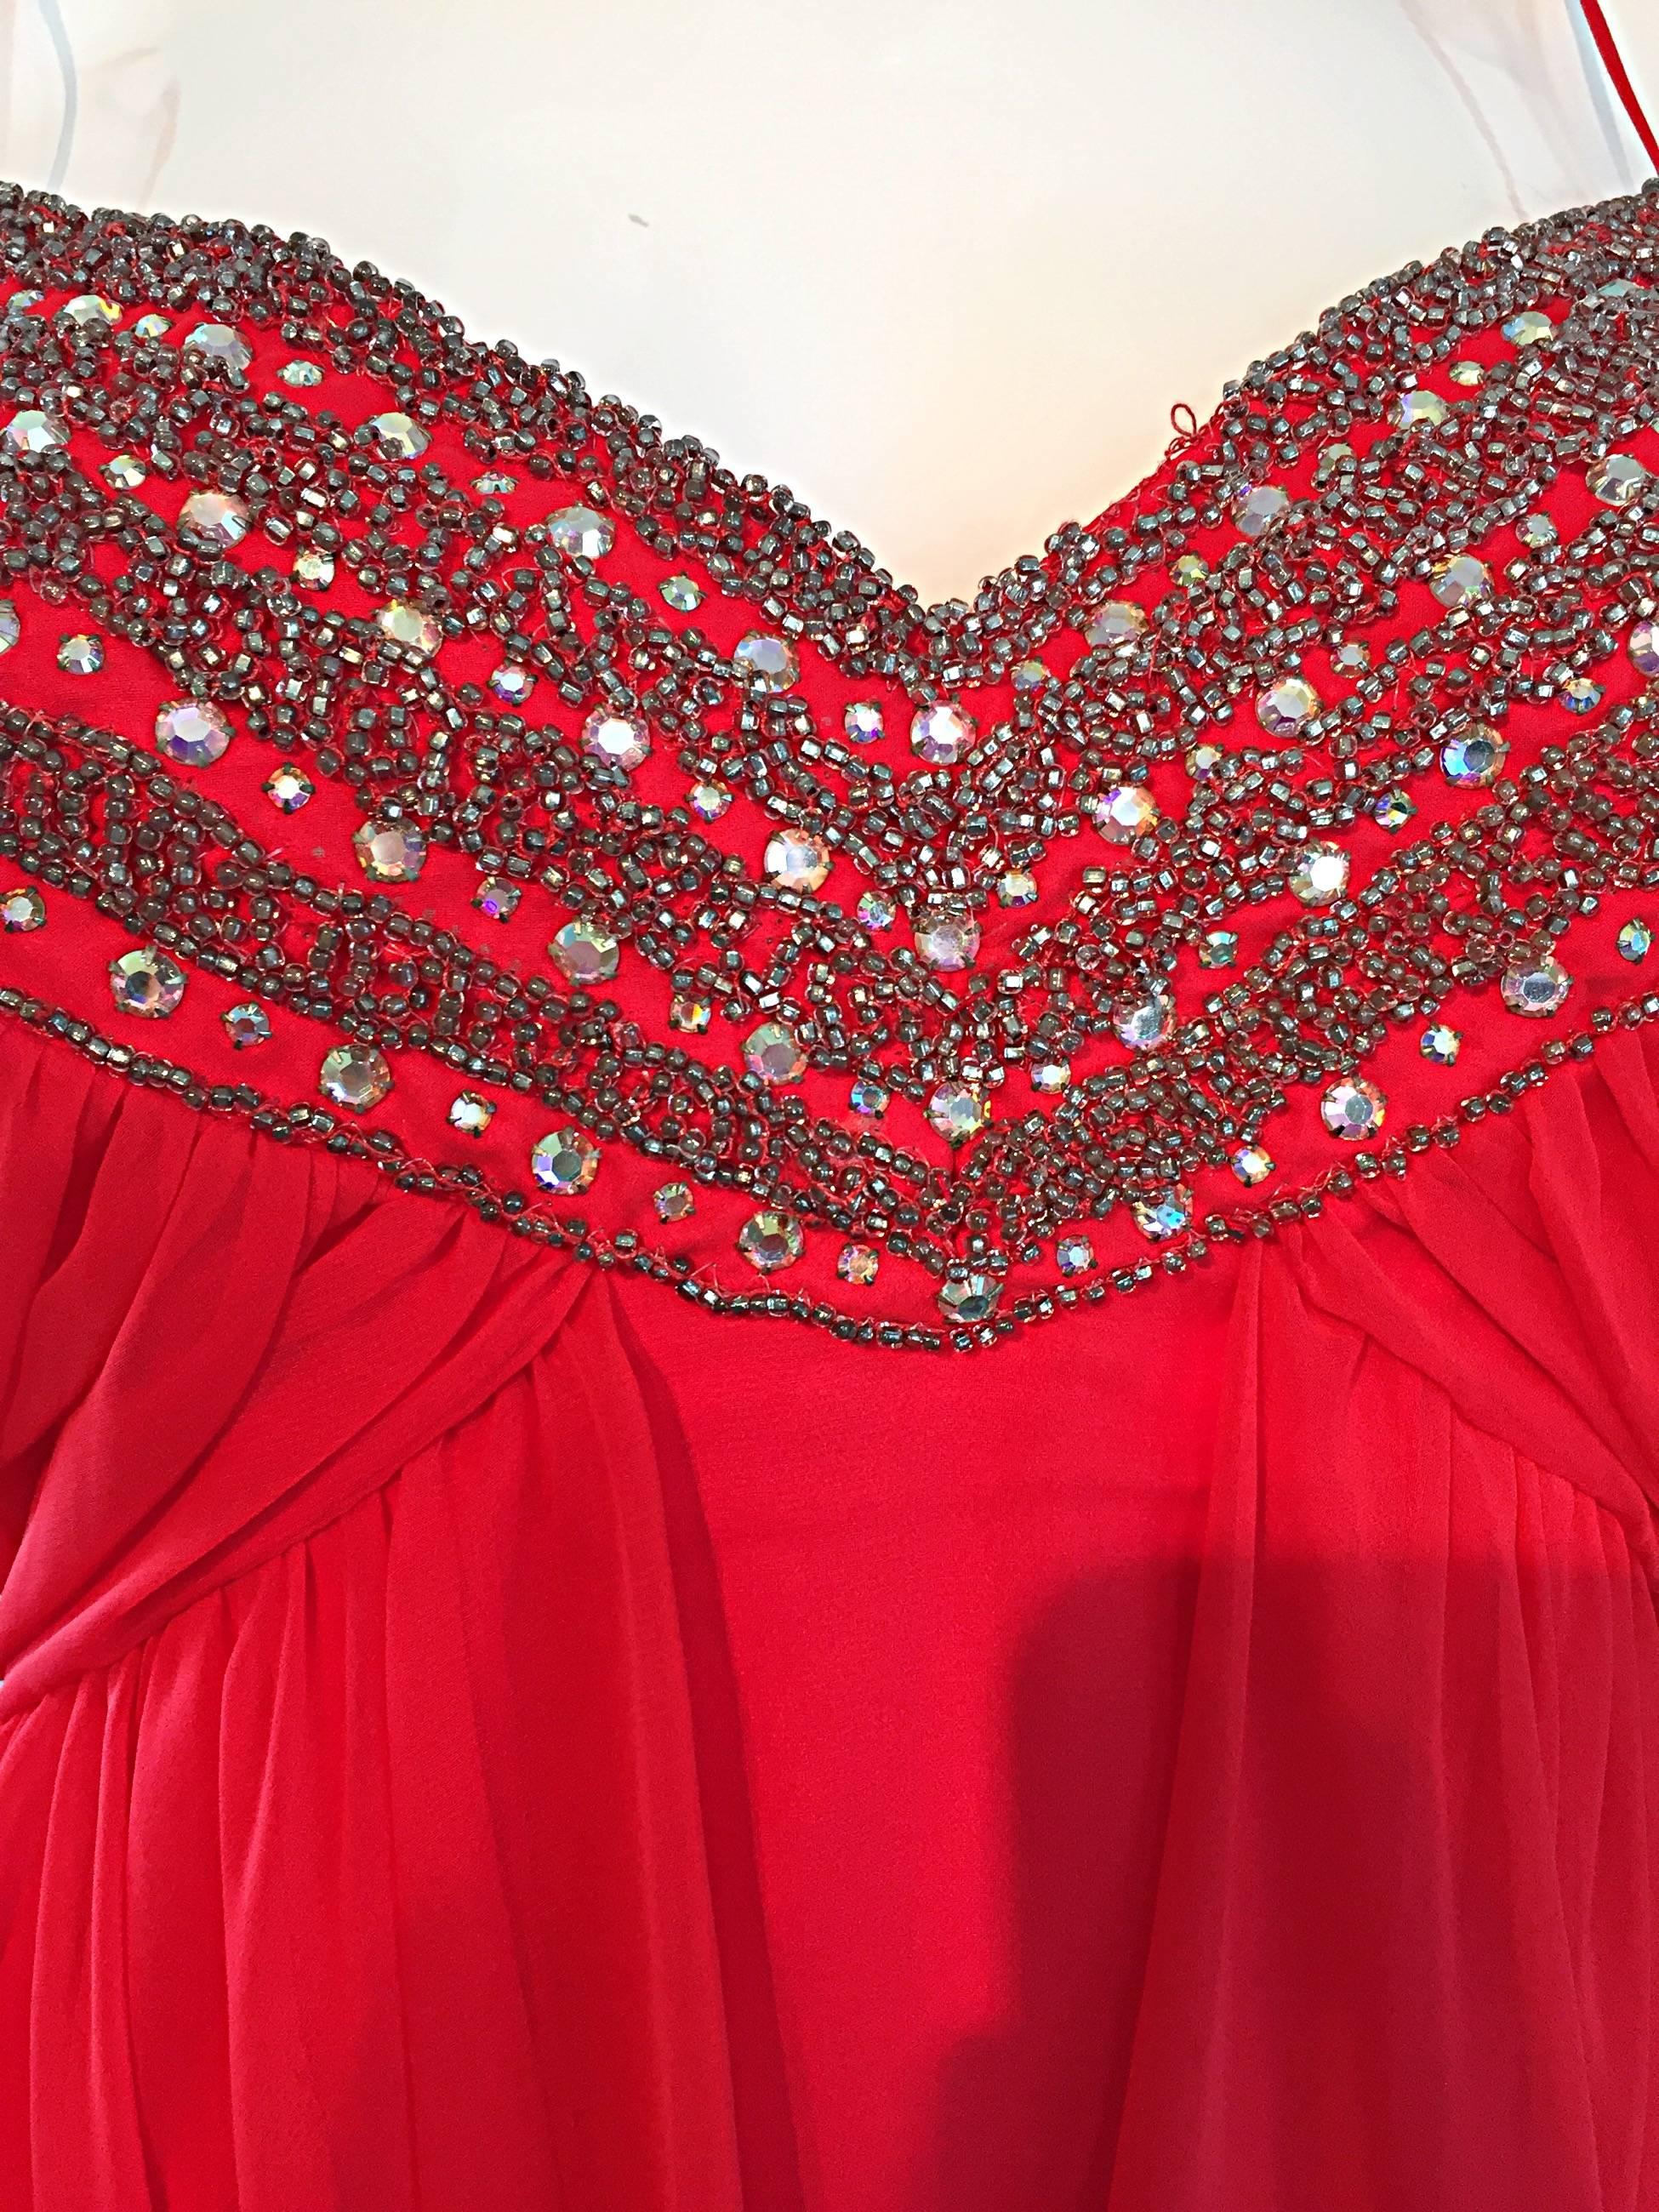 Exquisite 1970s Lipstick Red Chiffon Rhinestone Beaded Vintage 70s Goddess Gown  In Excellent Condition For Sale In San Diego, CA